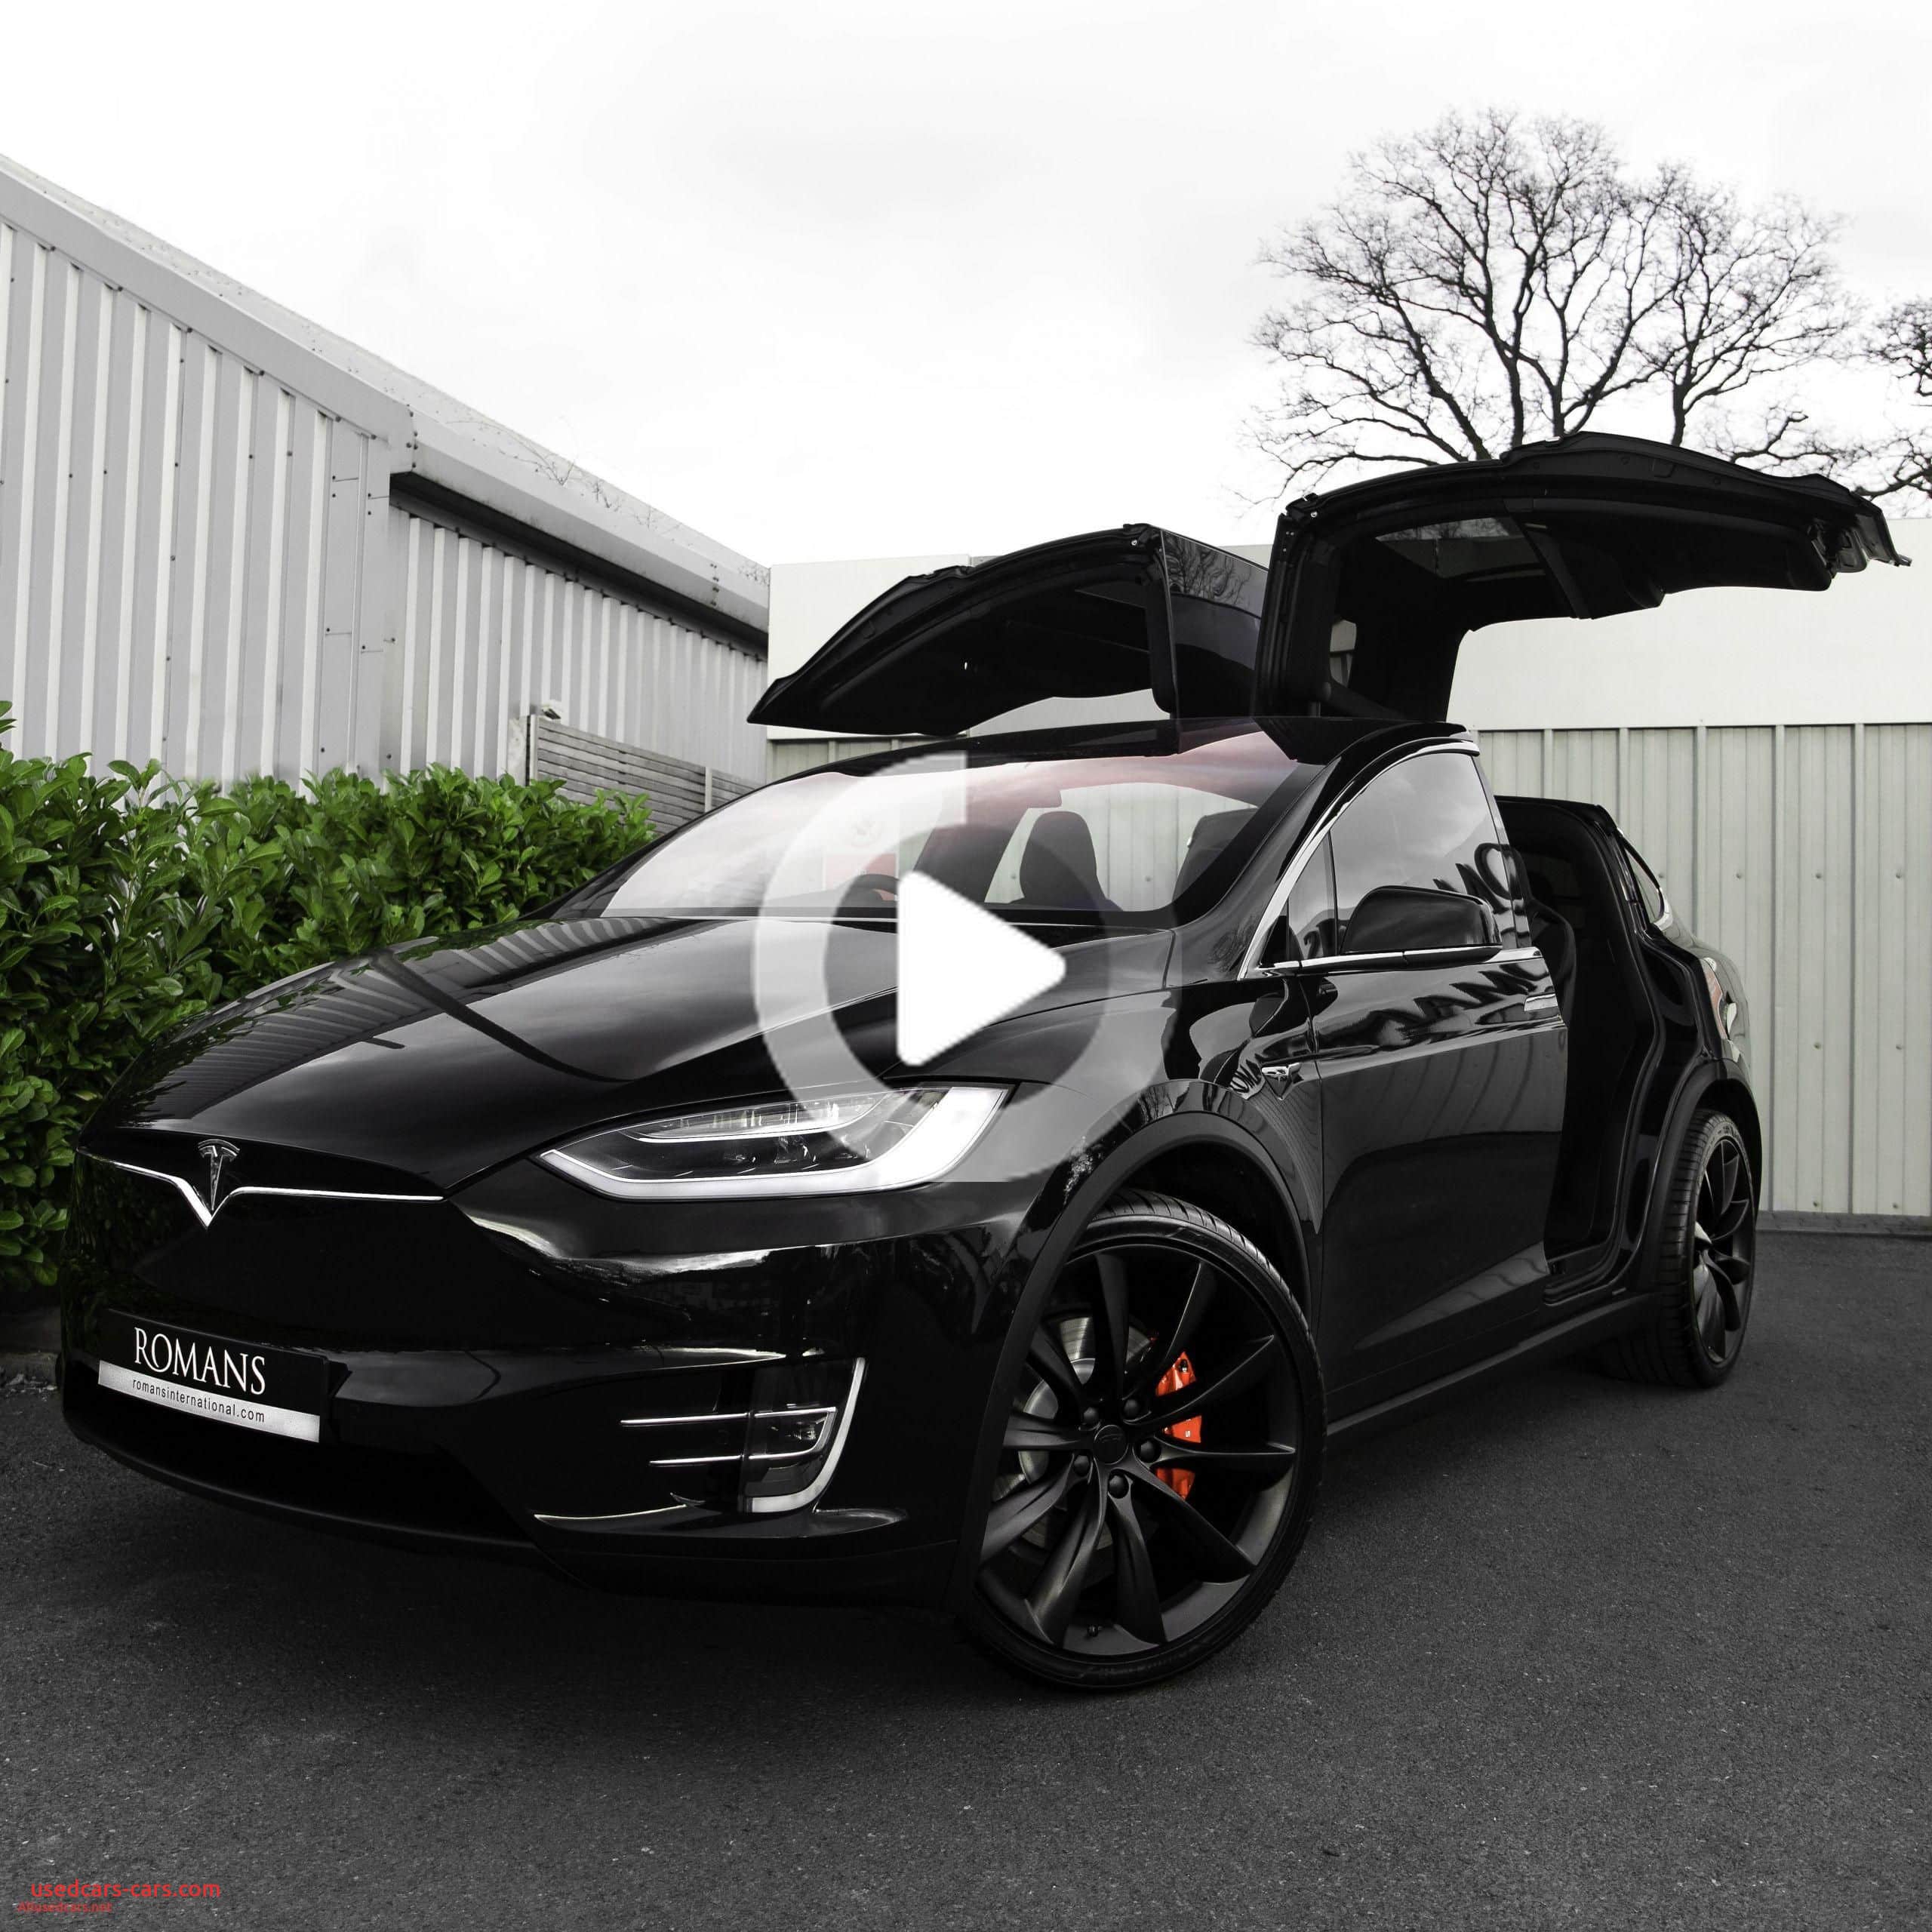 Tesla Smart Car Awesome which Tesla is the Cheapest Lovely 488 Best ...